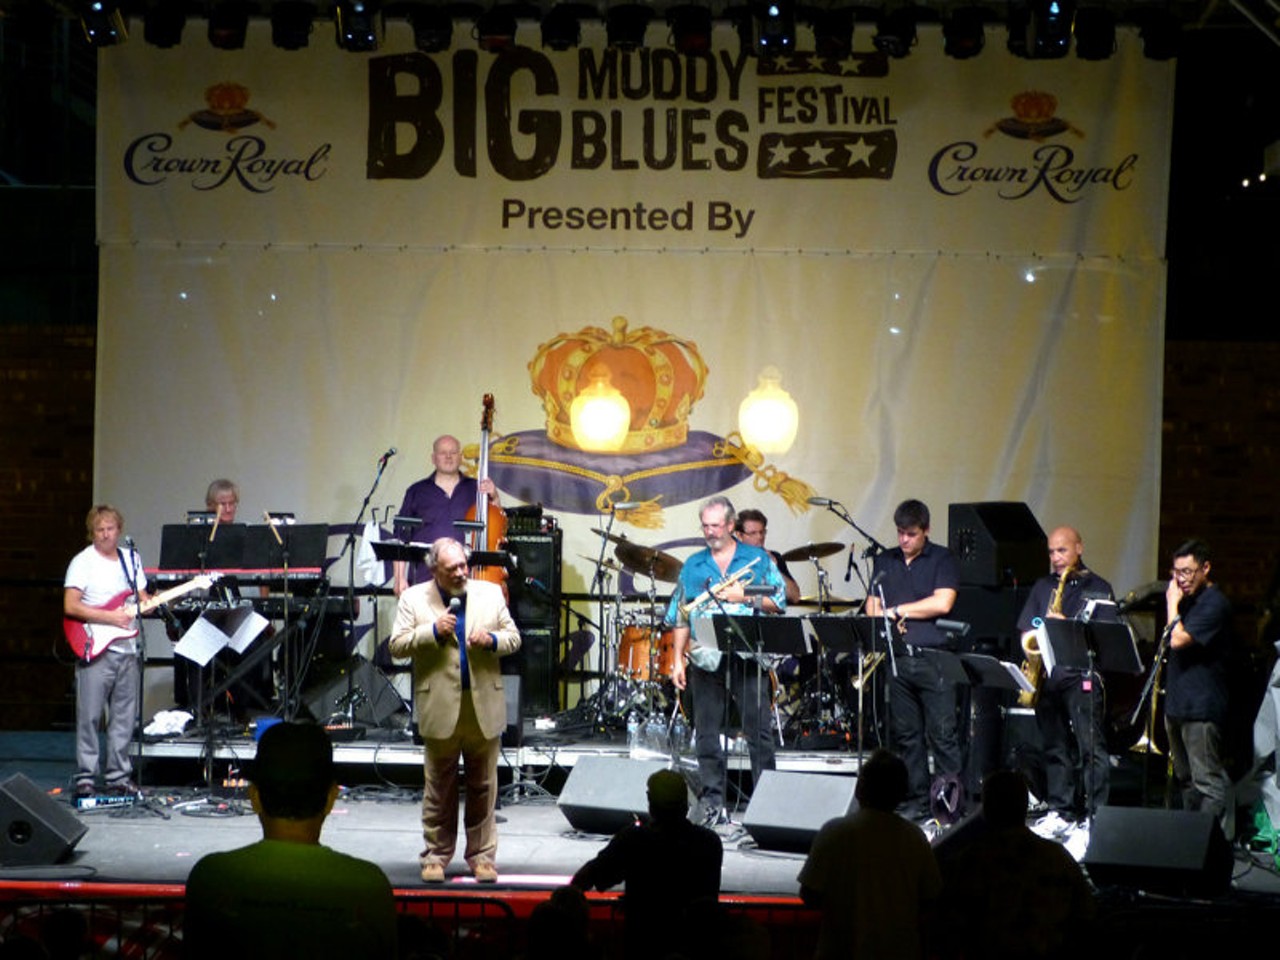 Big Muddy Blues Festival 
Granted, ten dollars will only buy you a one-day ticket to the Big Muddy Blues Festival, but that is a small price to pay for what will be a master class in local blues. Last year, the long-running event went all-local for the first time, bringing 45 of St. Louis' finest and most blues-riddled acts to three outdoor stages and three venues in Laclede's Landing (710 North Second Street, www.lacledeslanding.com). This year's lineup has not yet been announced, but the dates are set for Saturday, September 2 and Sunday, September 3. A solid track record of excellence makes this show a must-see affair. Keep an eye on bigmuddybluesfestival.com for announcements and more information. Photo courtesy of Flickr / Fred Ortlip.